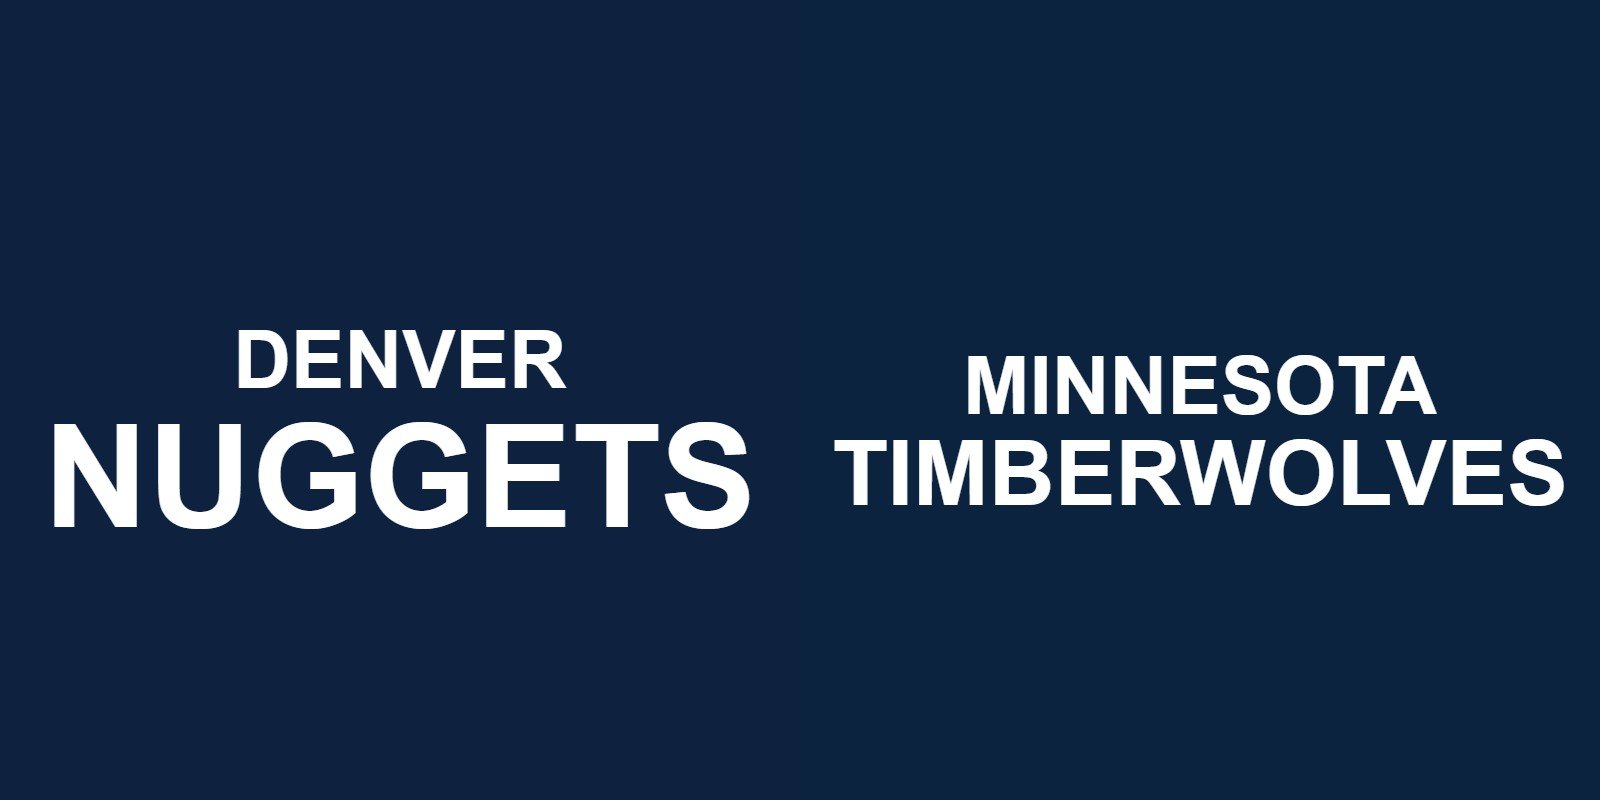 Nuggets vs Timberwolves Tickets